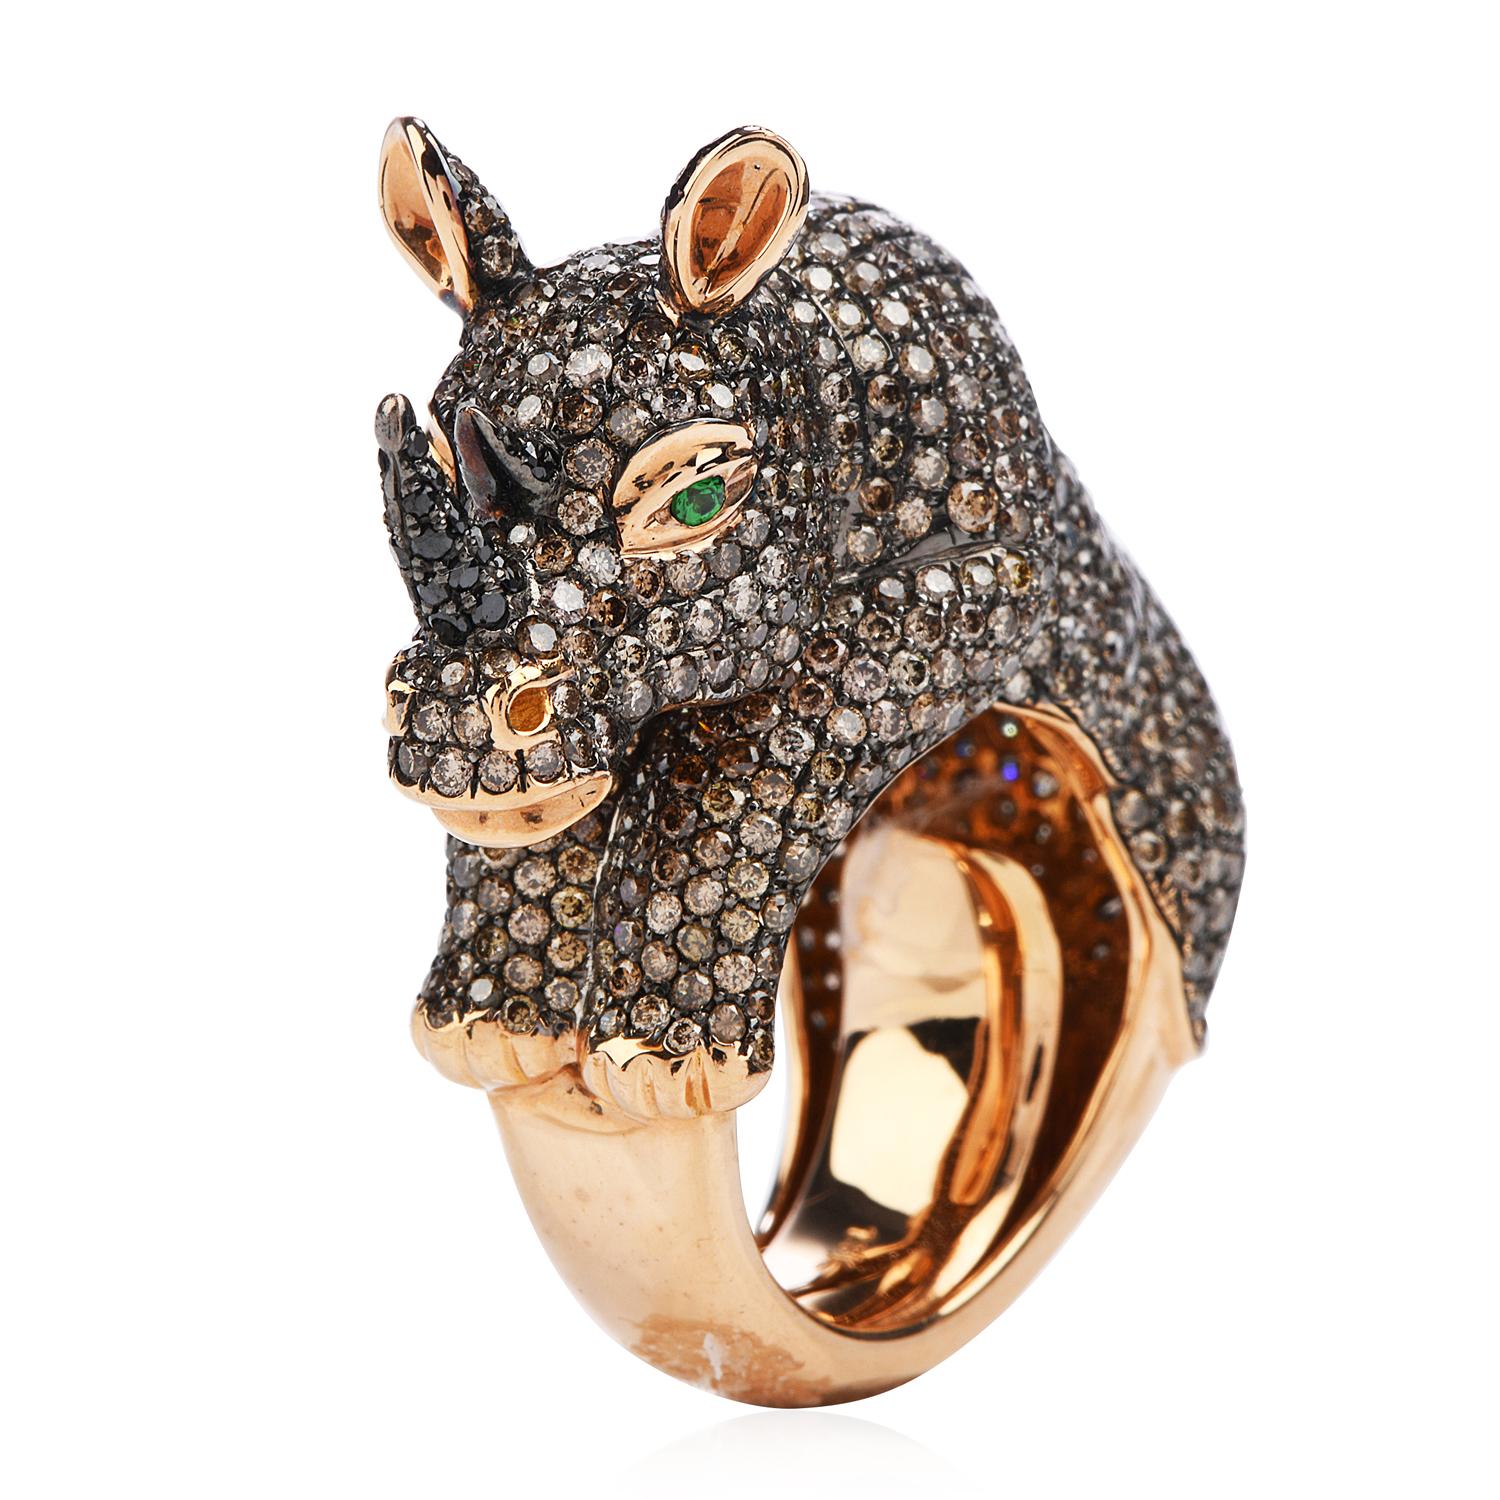 A unique rhinoceros inspired cocktail Diamond ring, the piece missing in any collector's jewelry box.

Crafted in solid heavy 18K rose gold, finely finished with black accents.

The eyes are (2)  round cut, flush set, genuine deep green Tsavorites